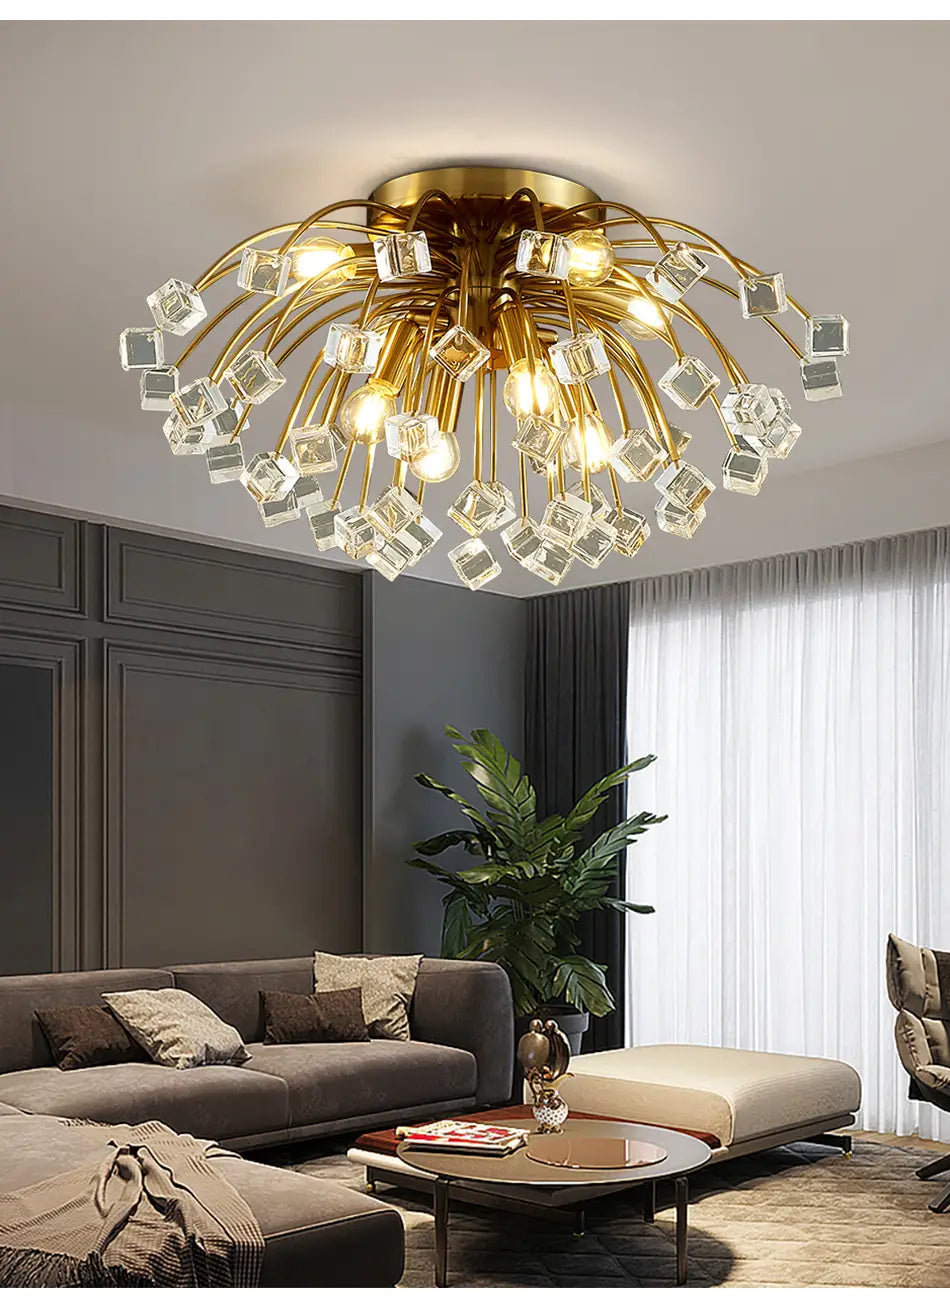 Modern Colorful Crystal Ceiling Chandeliers For Bedroom